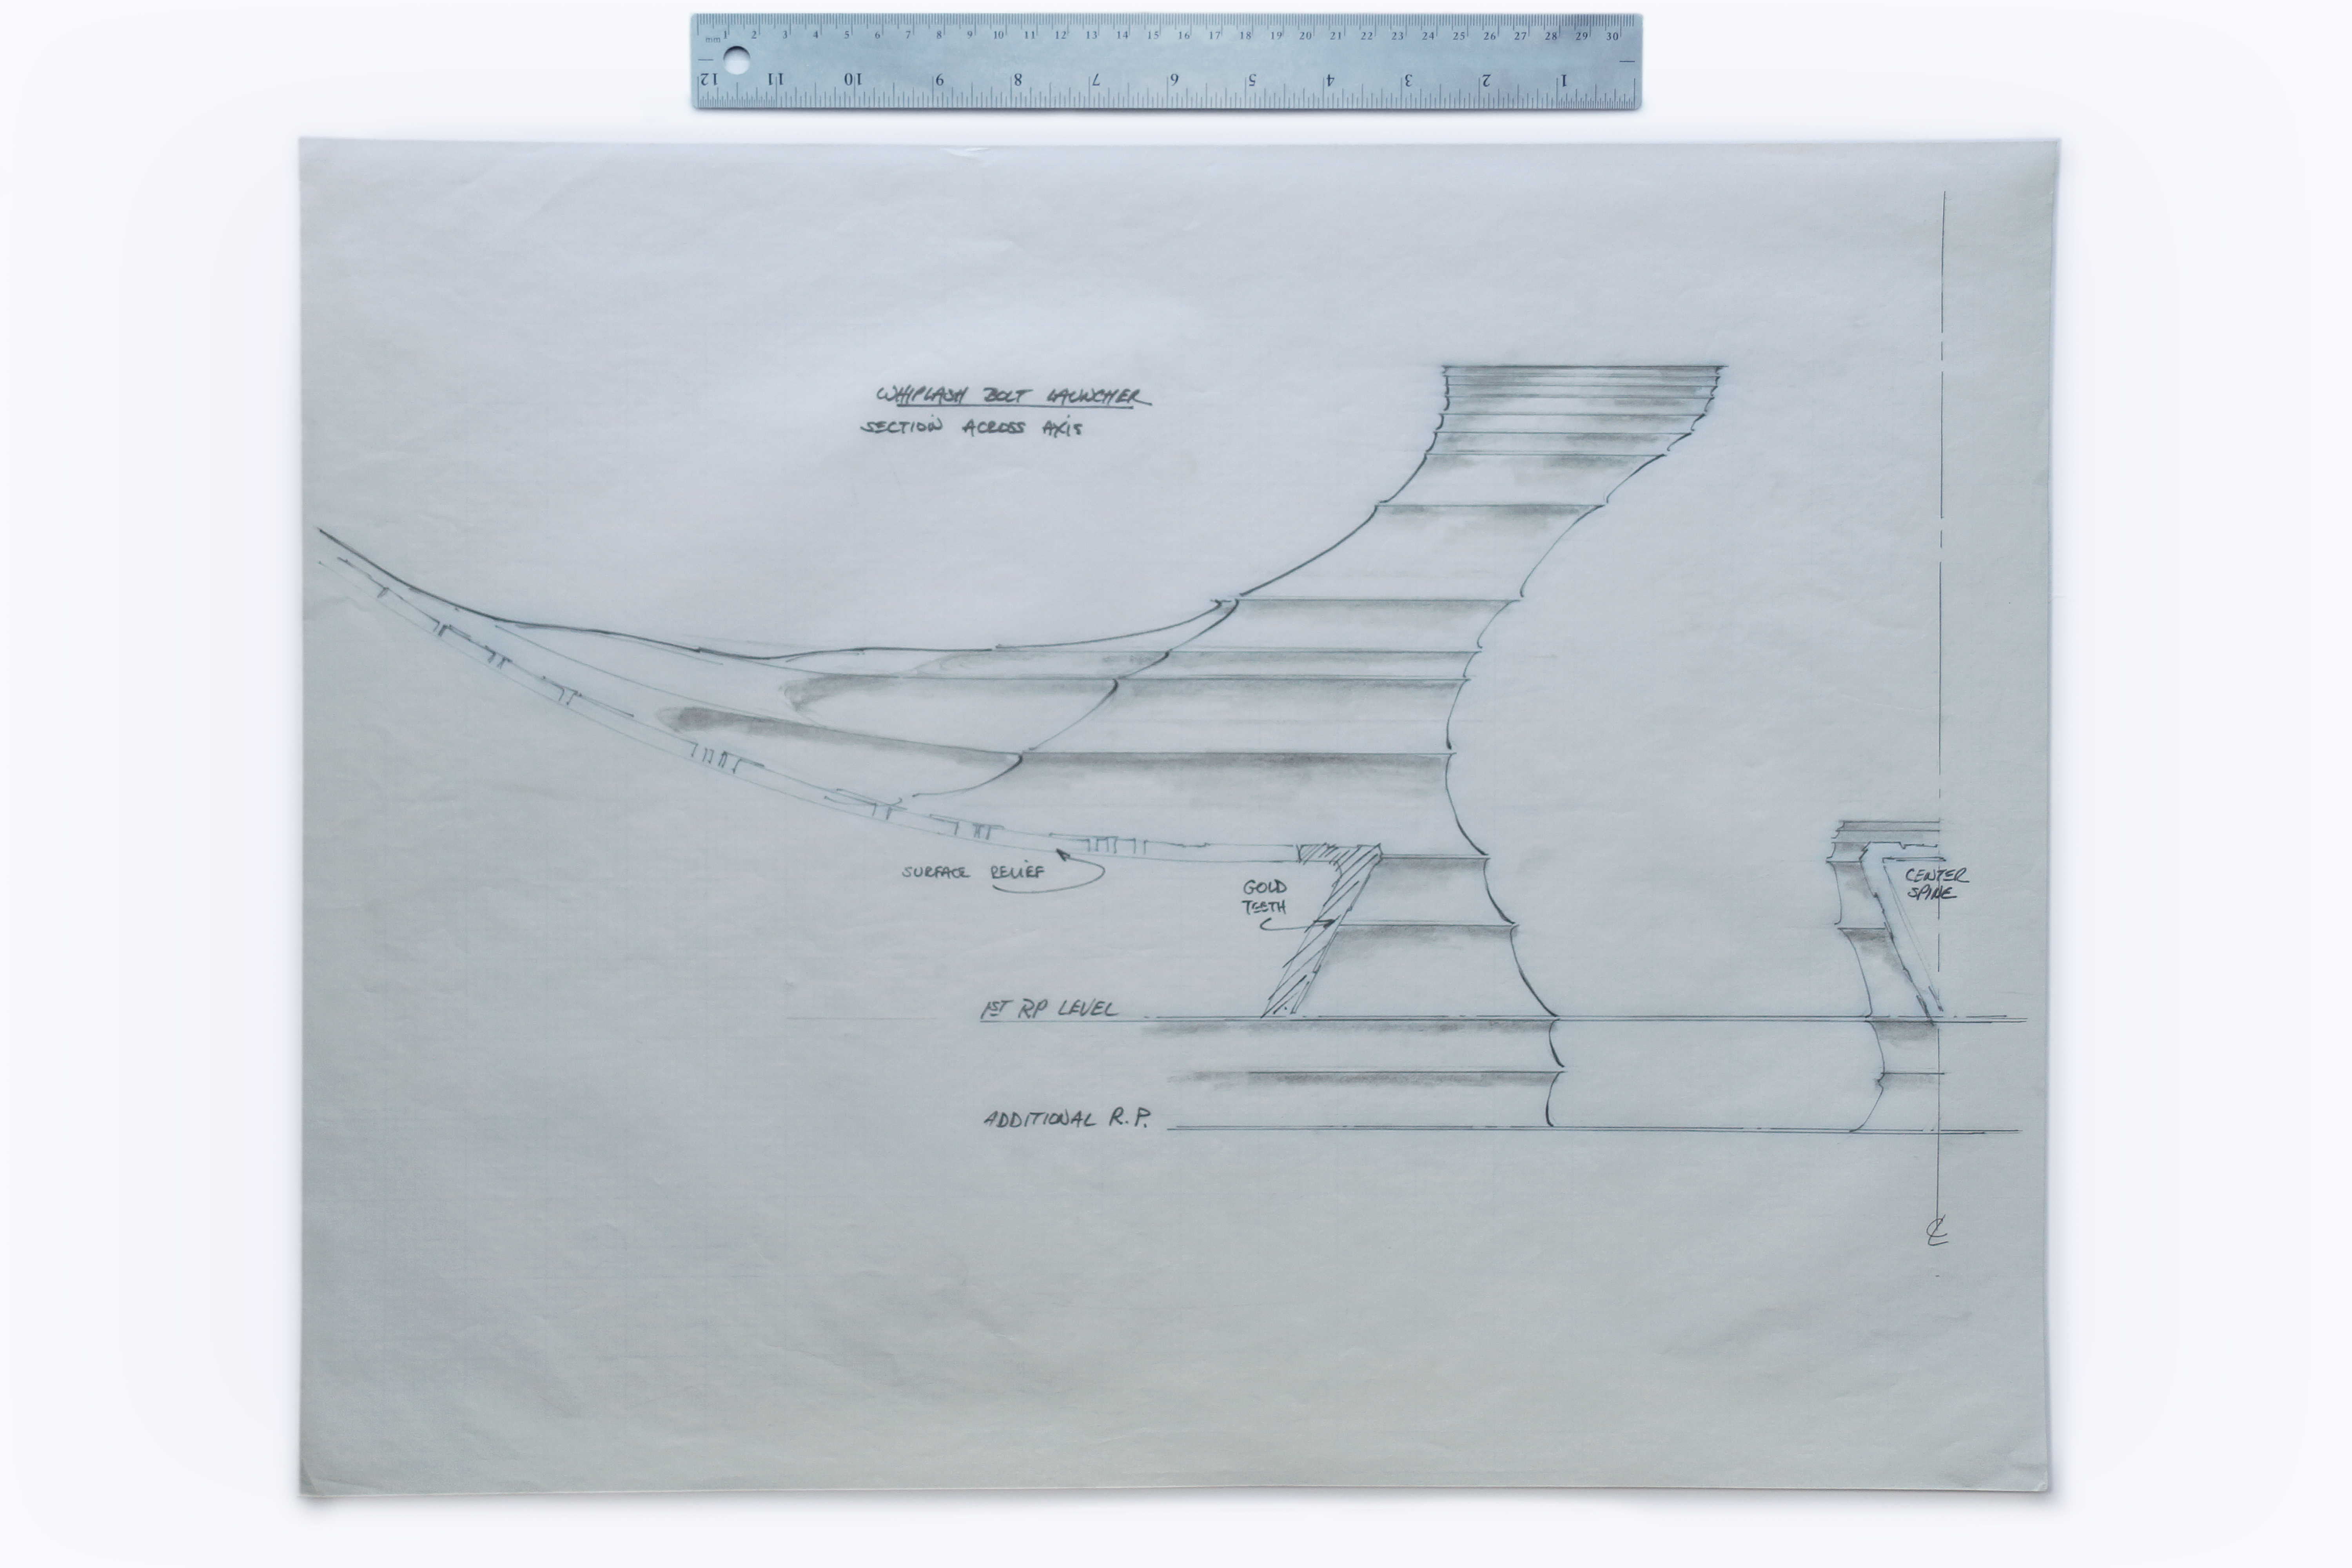 17" x 22" production drawing of V'ger filming miniature whiplash bolt launcher tower by Apogee Inc. for Star Trek: The Motion Picture.